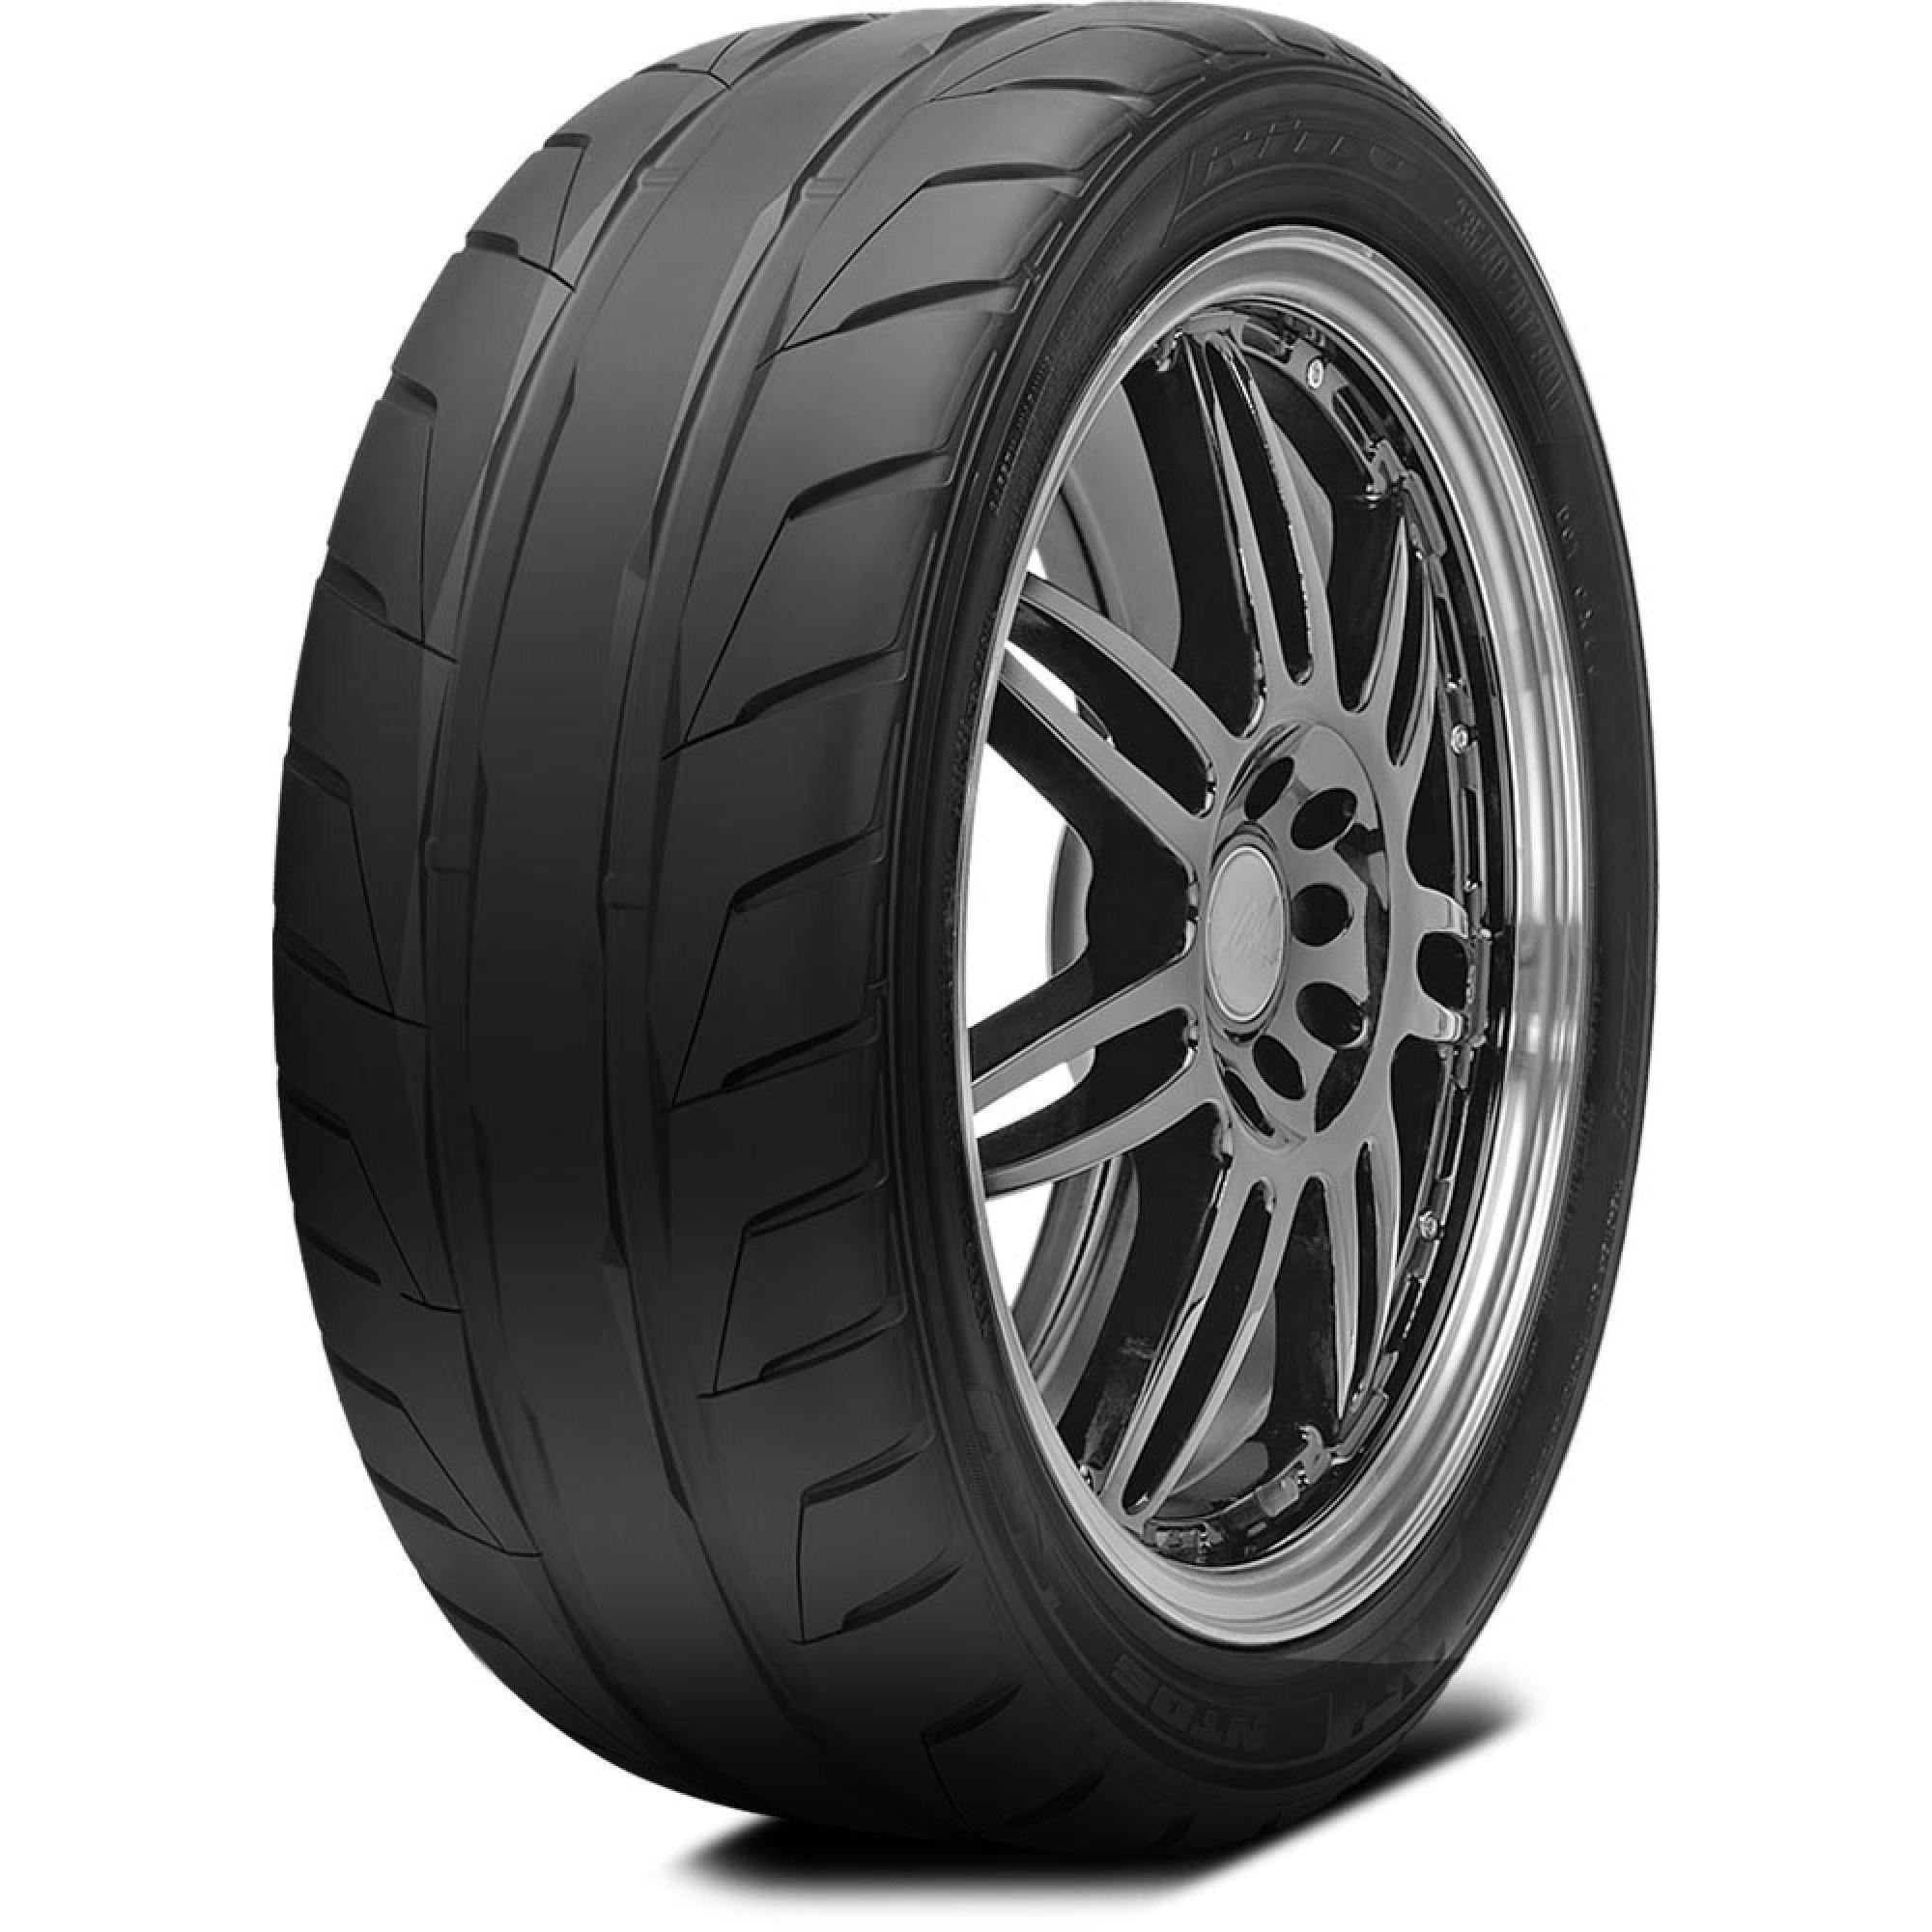 245/40ZR19 98W NITTO NT-05 SUMMER TIRES